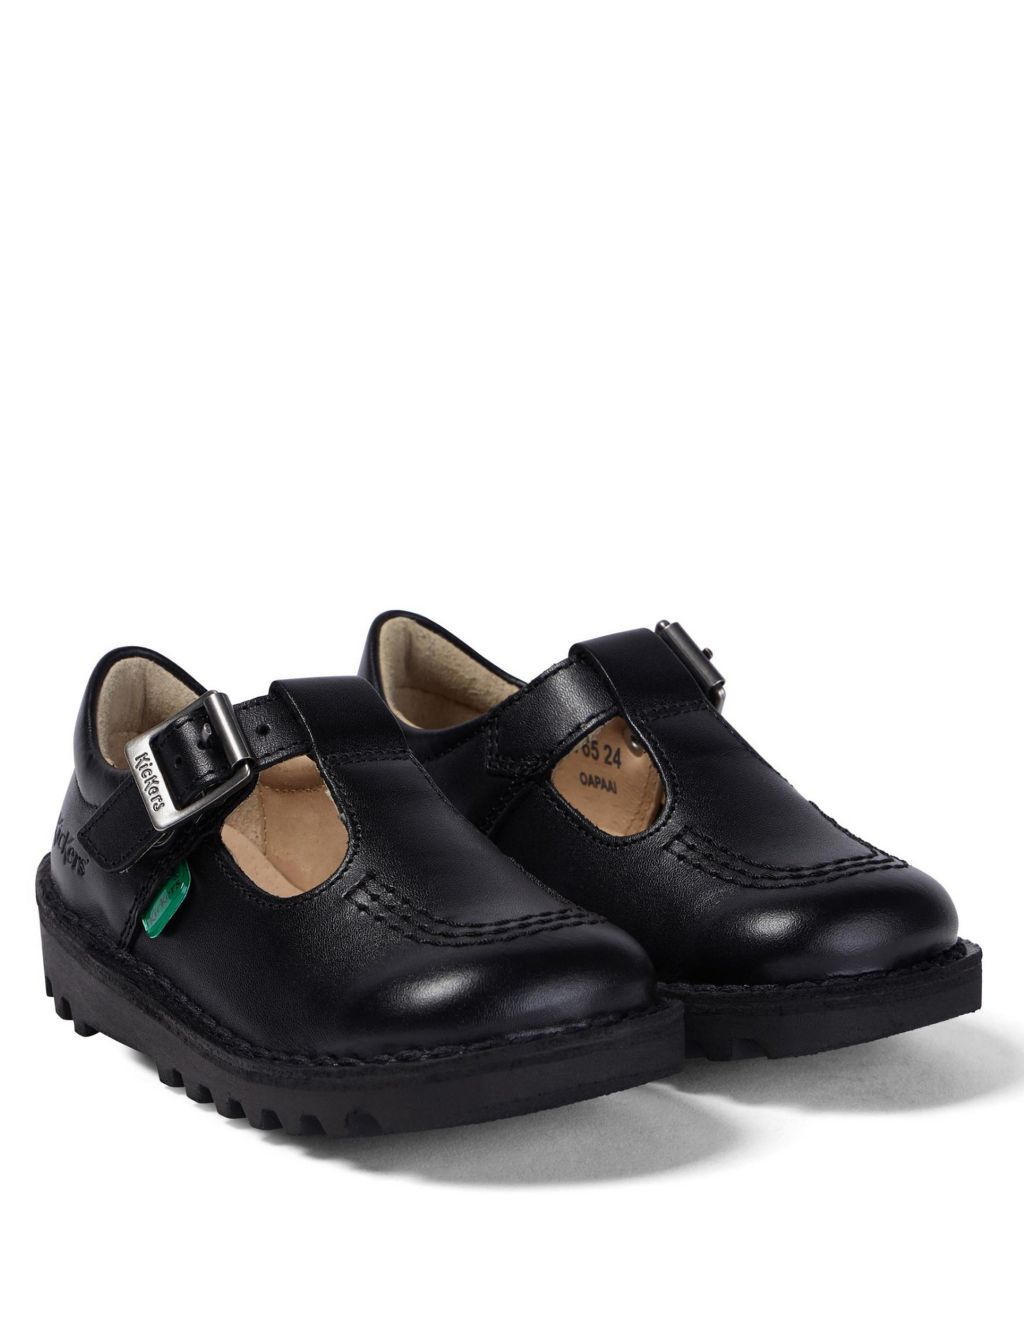 Kids' Leather School Shoes (7 Small - 12 Small) image 2